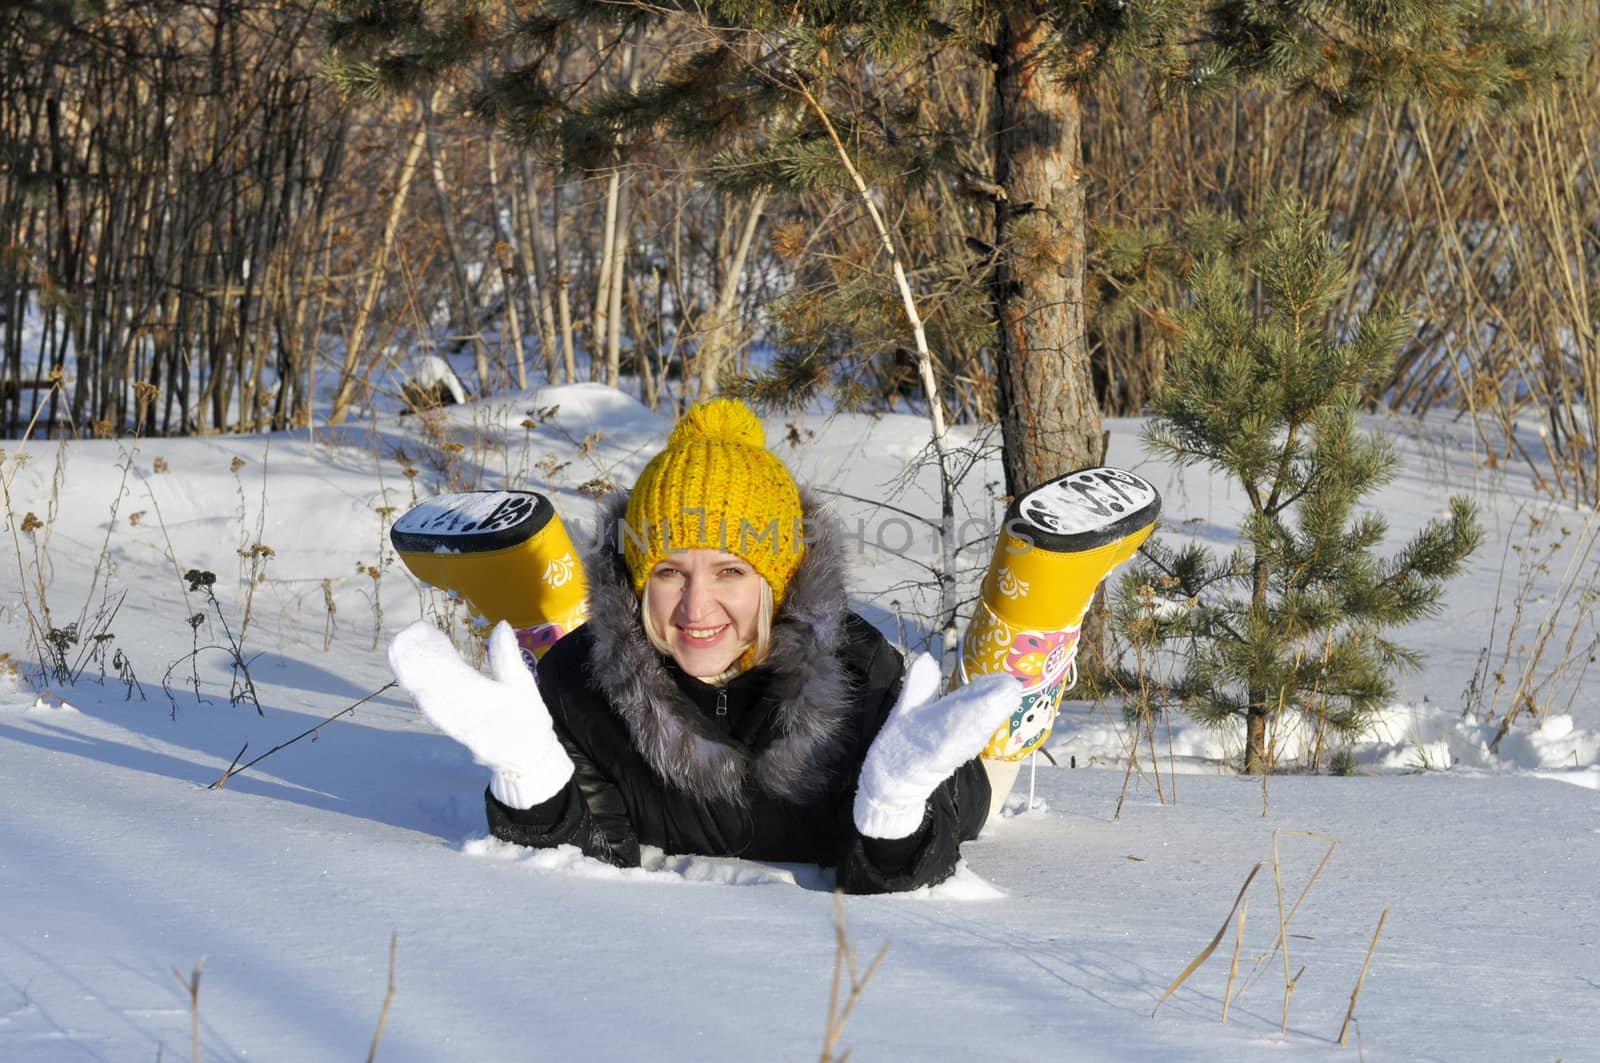 The joyful young woman lies on snow near a pine in park